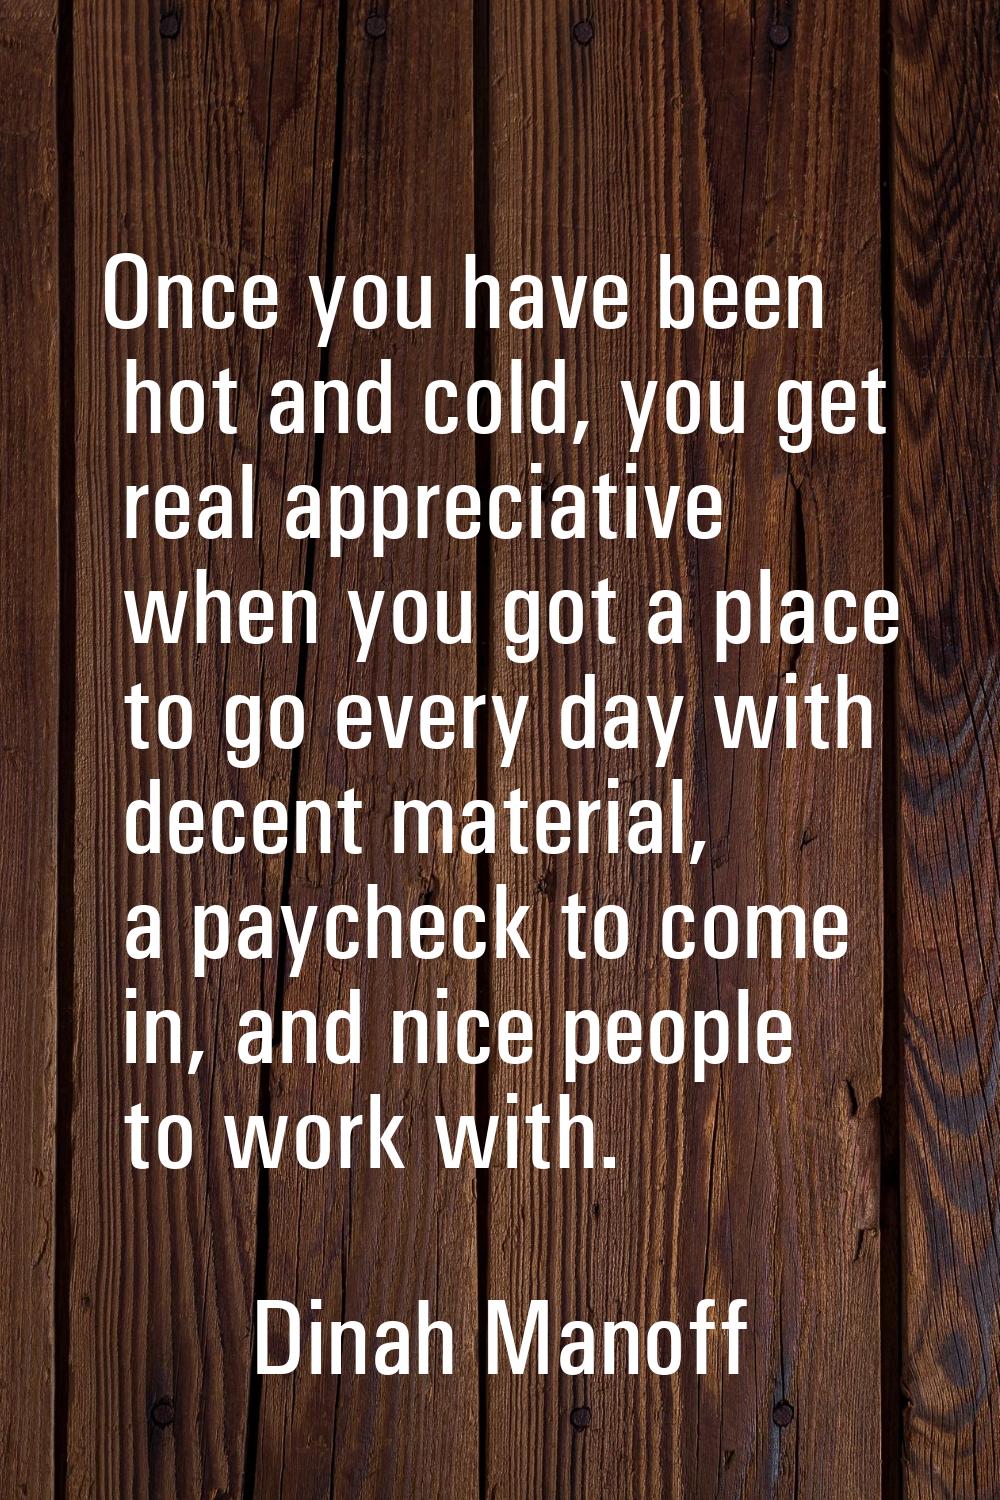 Once you have been hot and cold, you get real appreciative when you got a place to go every day wit